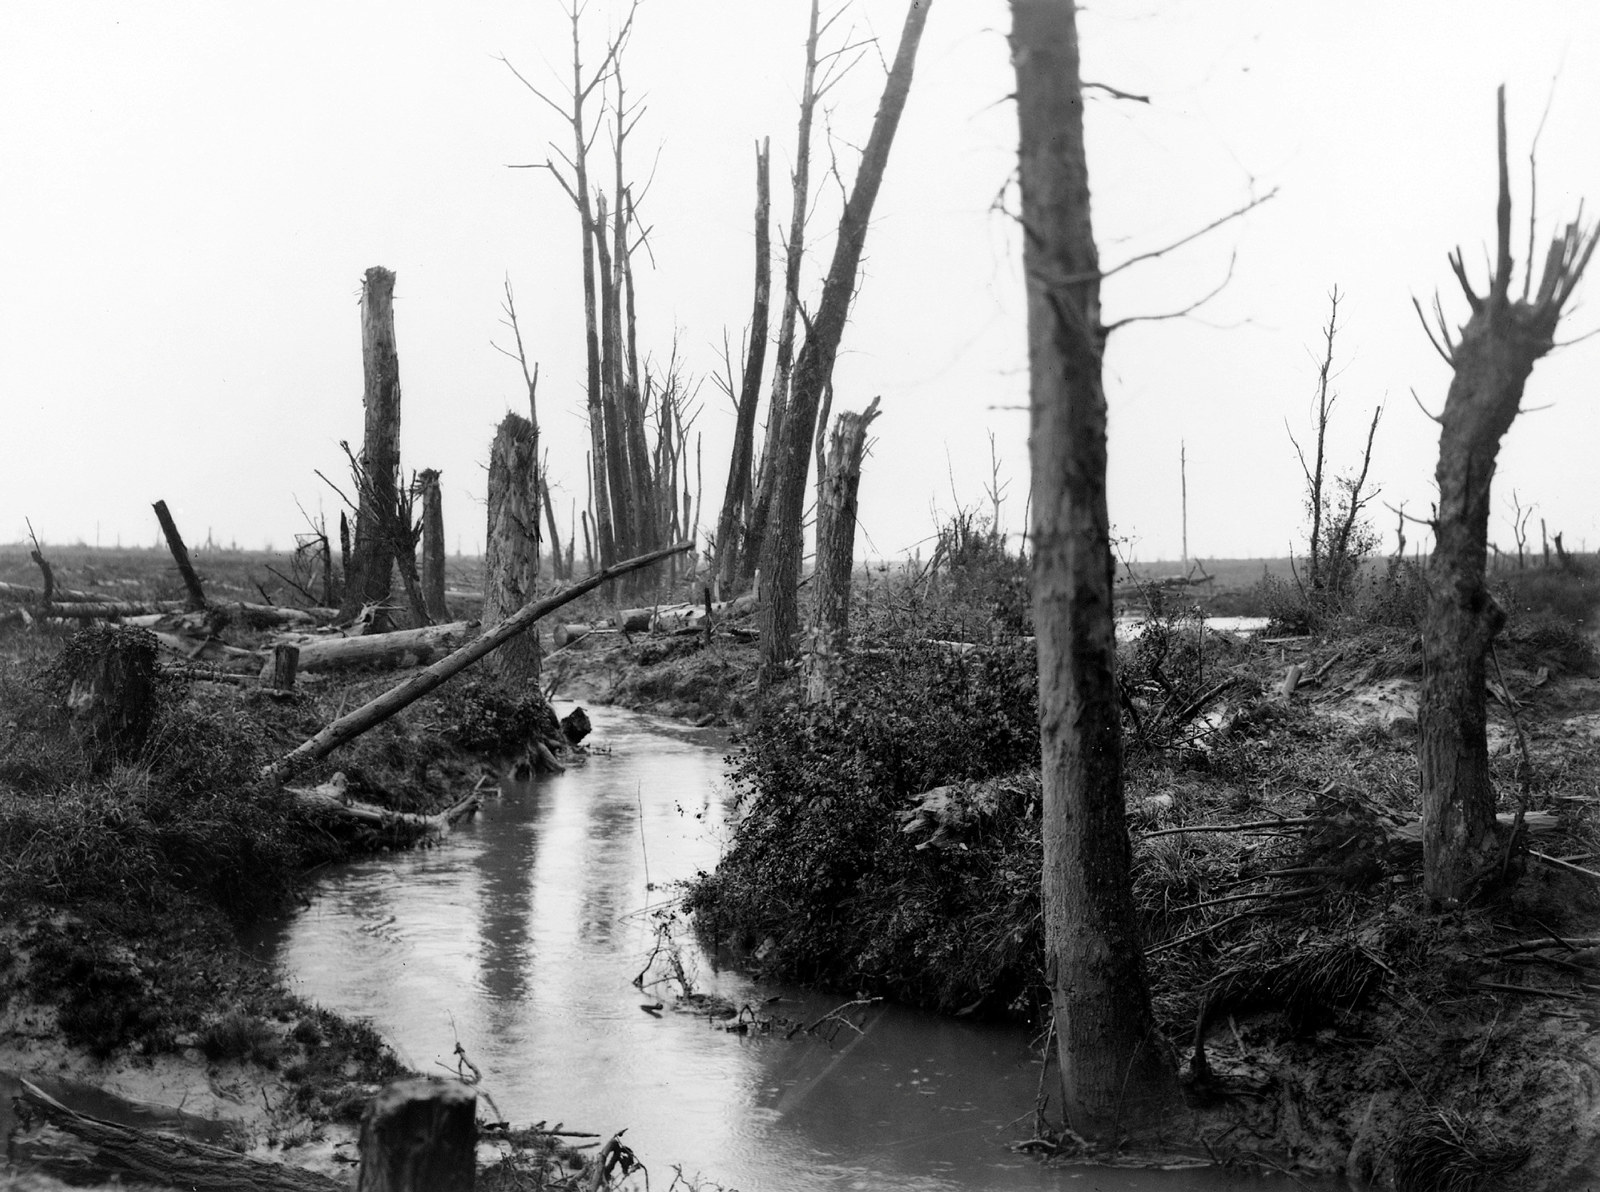 A view of the Douve River looking towards La Potterie farm south of the river between Ploegsteert Wood and Mesen (Messines) in Belgium, 11 November 1917